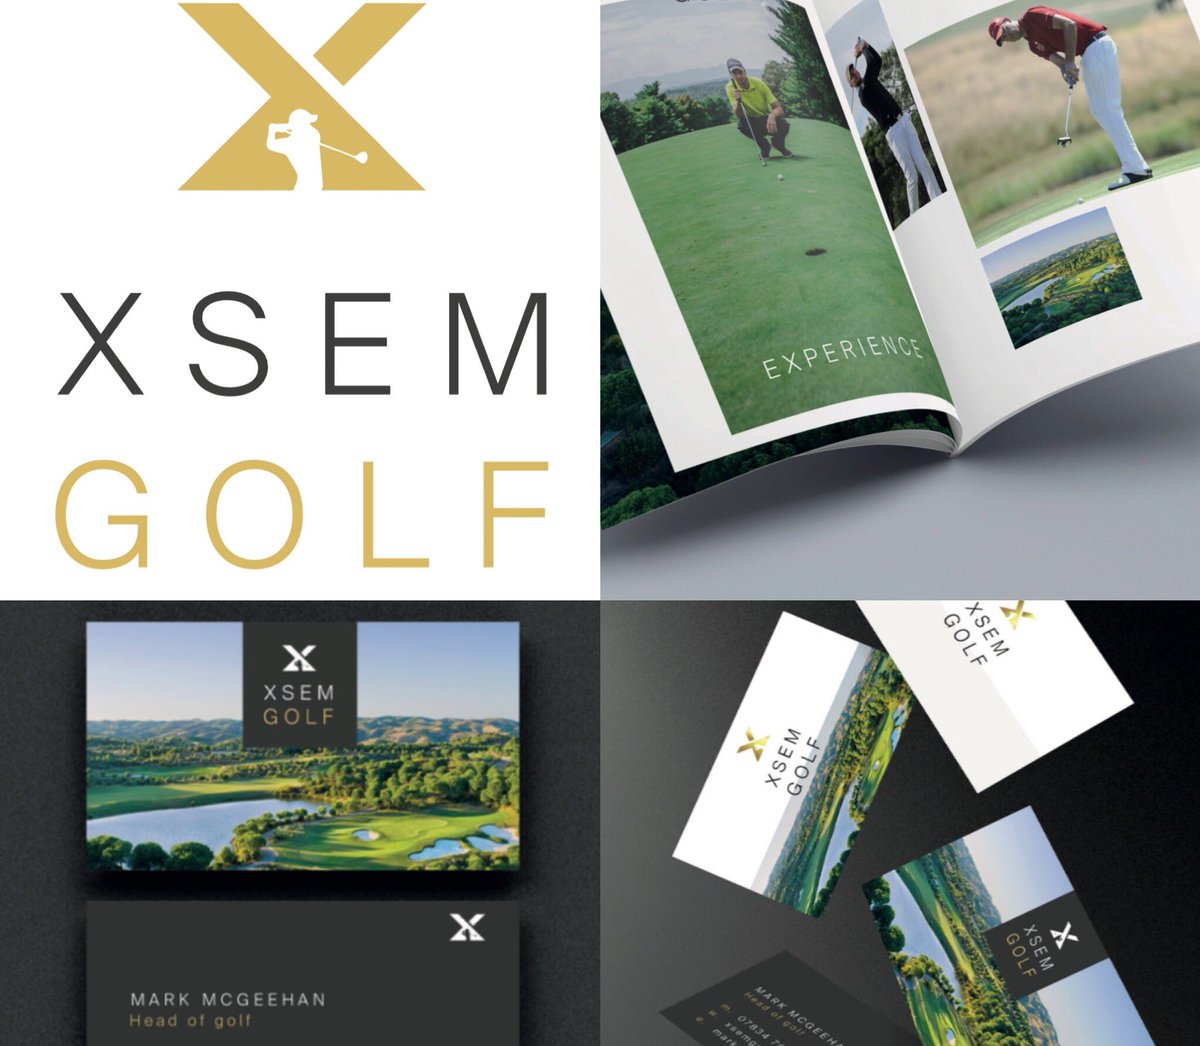 Proud to be Head of Golf at XSEM. Exciting and busy 2019 ahead. #topvenues #luxurytravel #proams #corporategolf #ProfessionalEvents #professionalspeaking #host #Vip